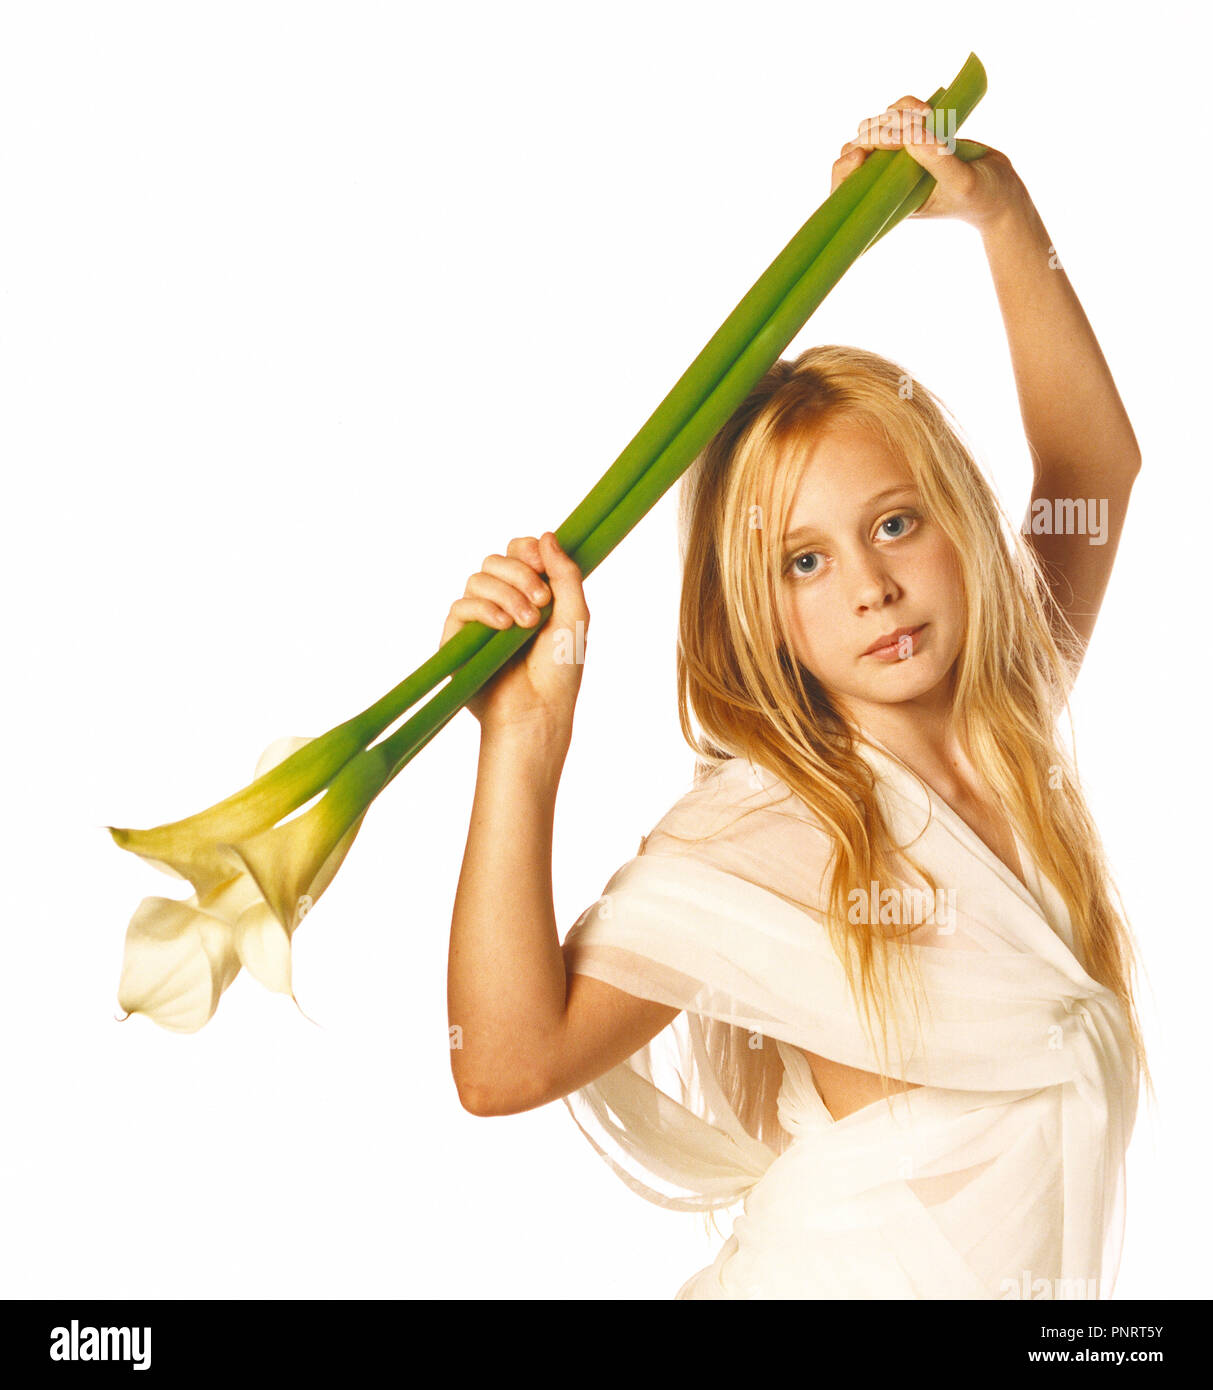 Children. Studio portrait of young blond hair girl holding a long-stemmed lwhite lily above her head. Stock Photo